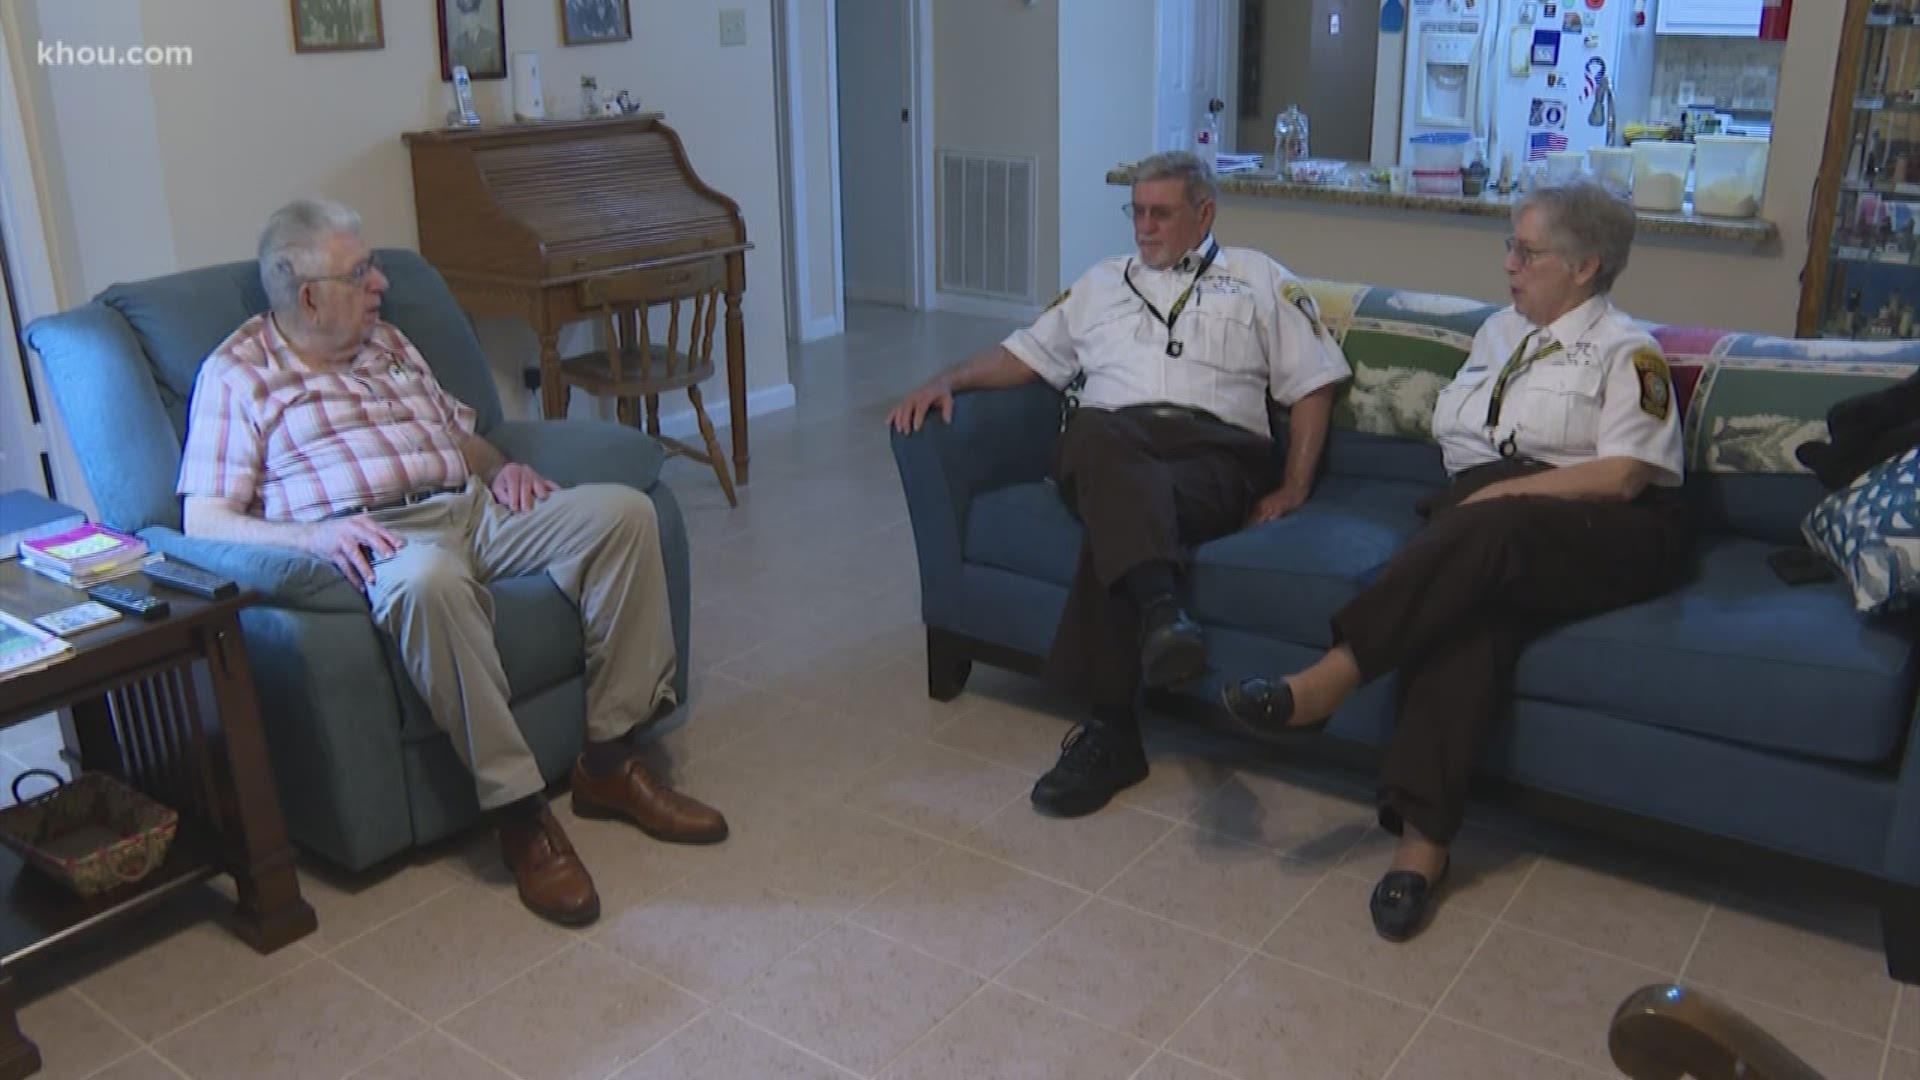 The Fort Bend County Sheriff's Office started a program to make sure seniors without family nearby can get the help they need.